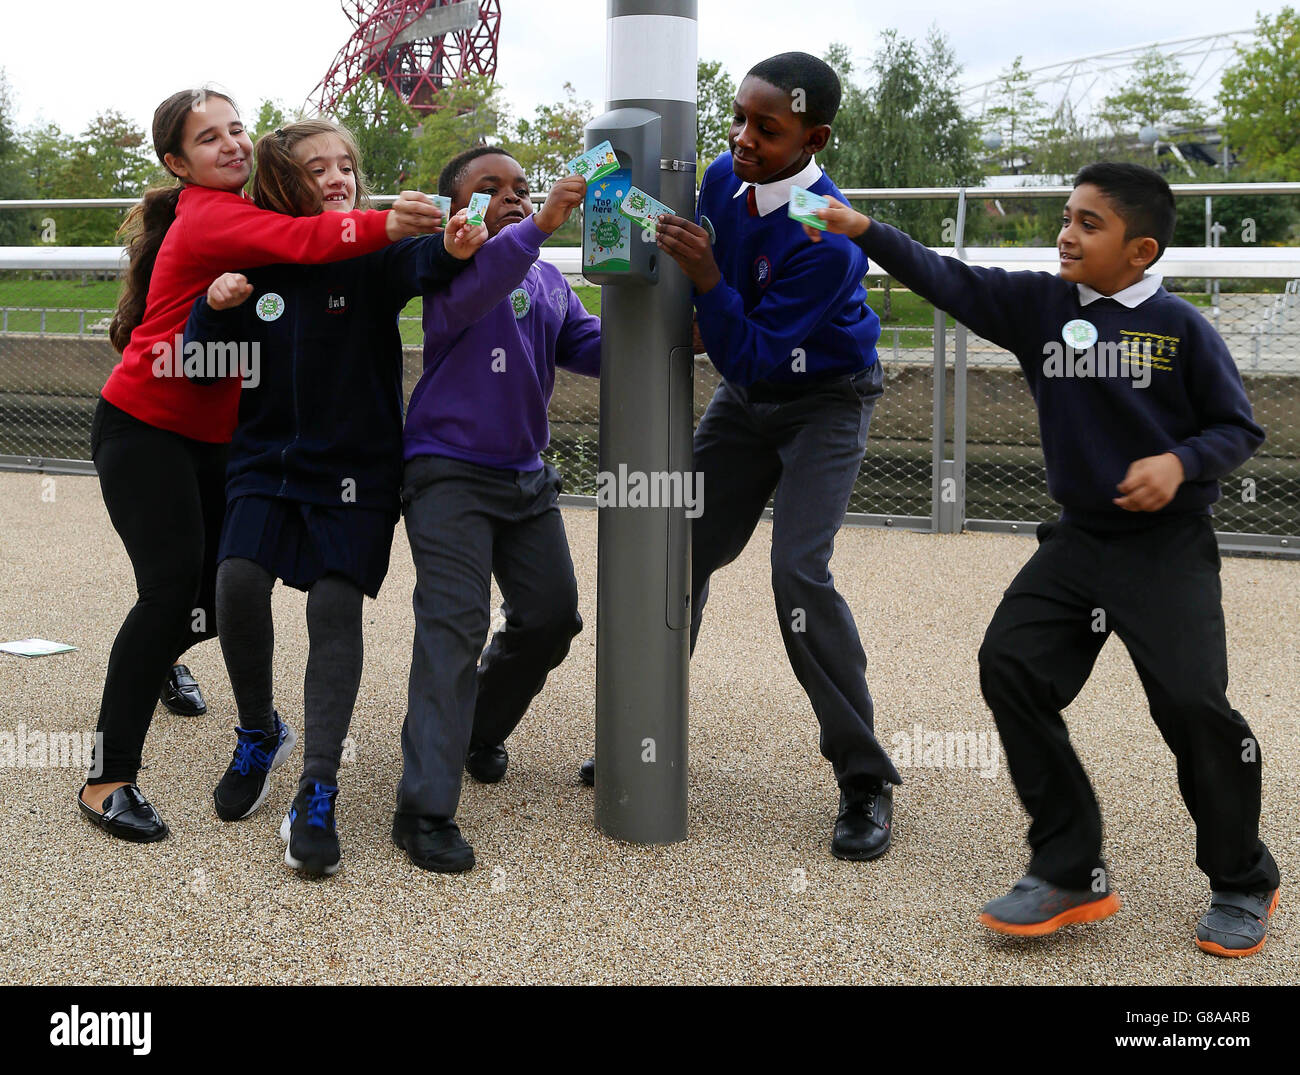 (Left to right) Maria from Sybourn School, Aulona from Manor Primary School, Ronald from St. Dominic's School, Sydney from Berger Primary School and Omar from Chisenhale Primary School, help to launch the Beat the Street campaign, which has been set up by the National Charity Partnership, a partnership between Diabetes UK, British Heart Foundation and Tesco, at the Queen Elizabeth Olympic Park in Stratford, London. Stock Photo